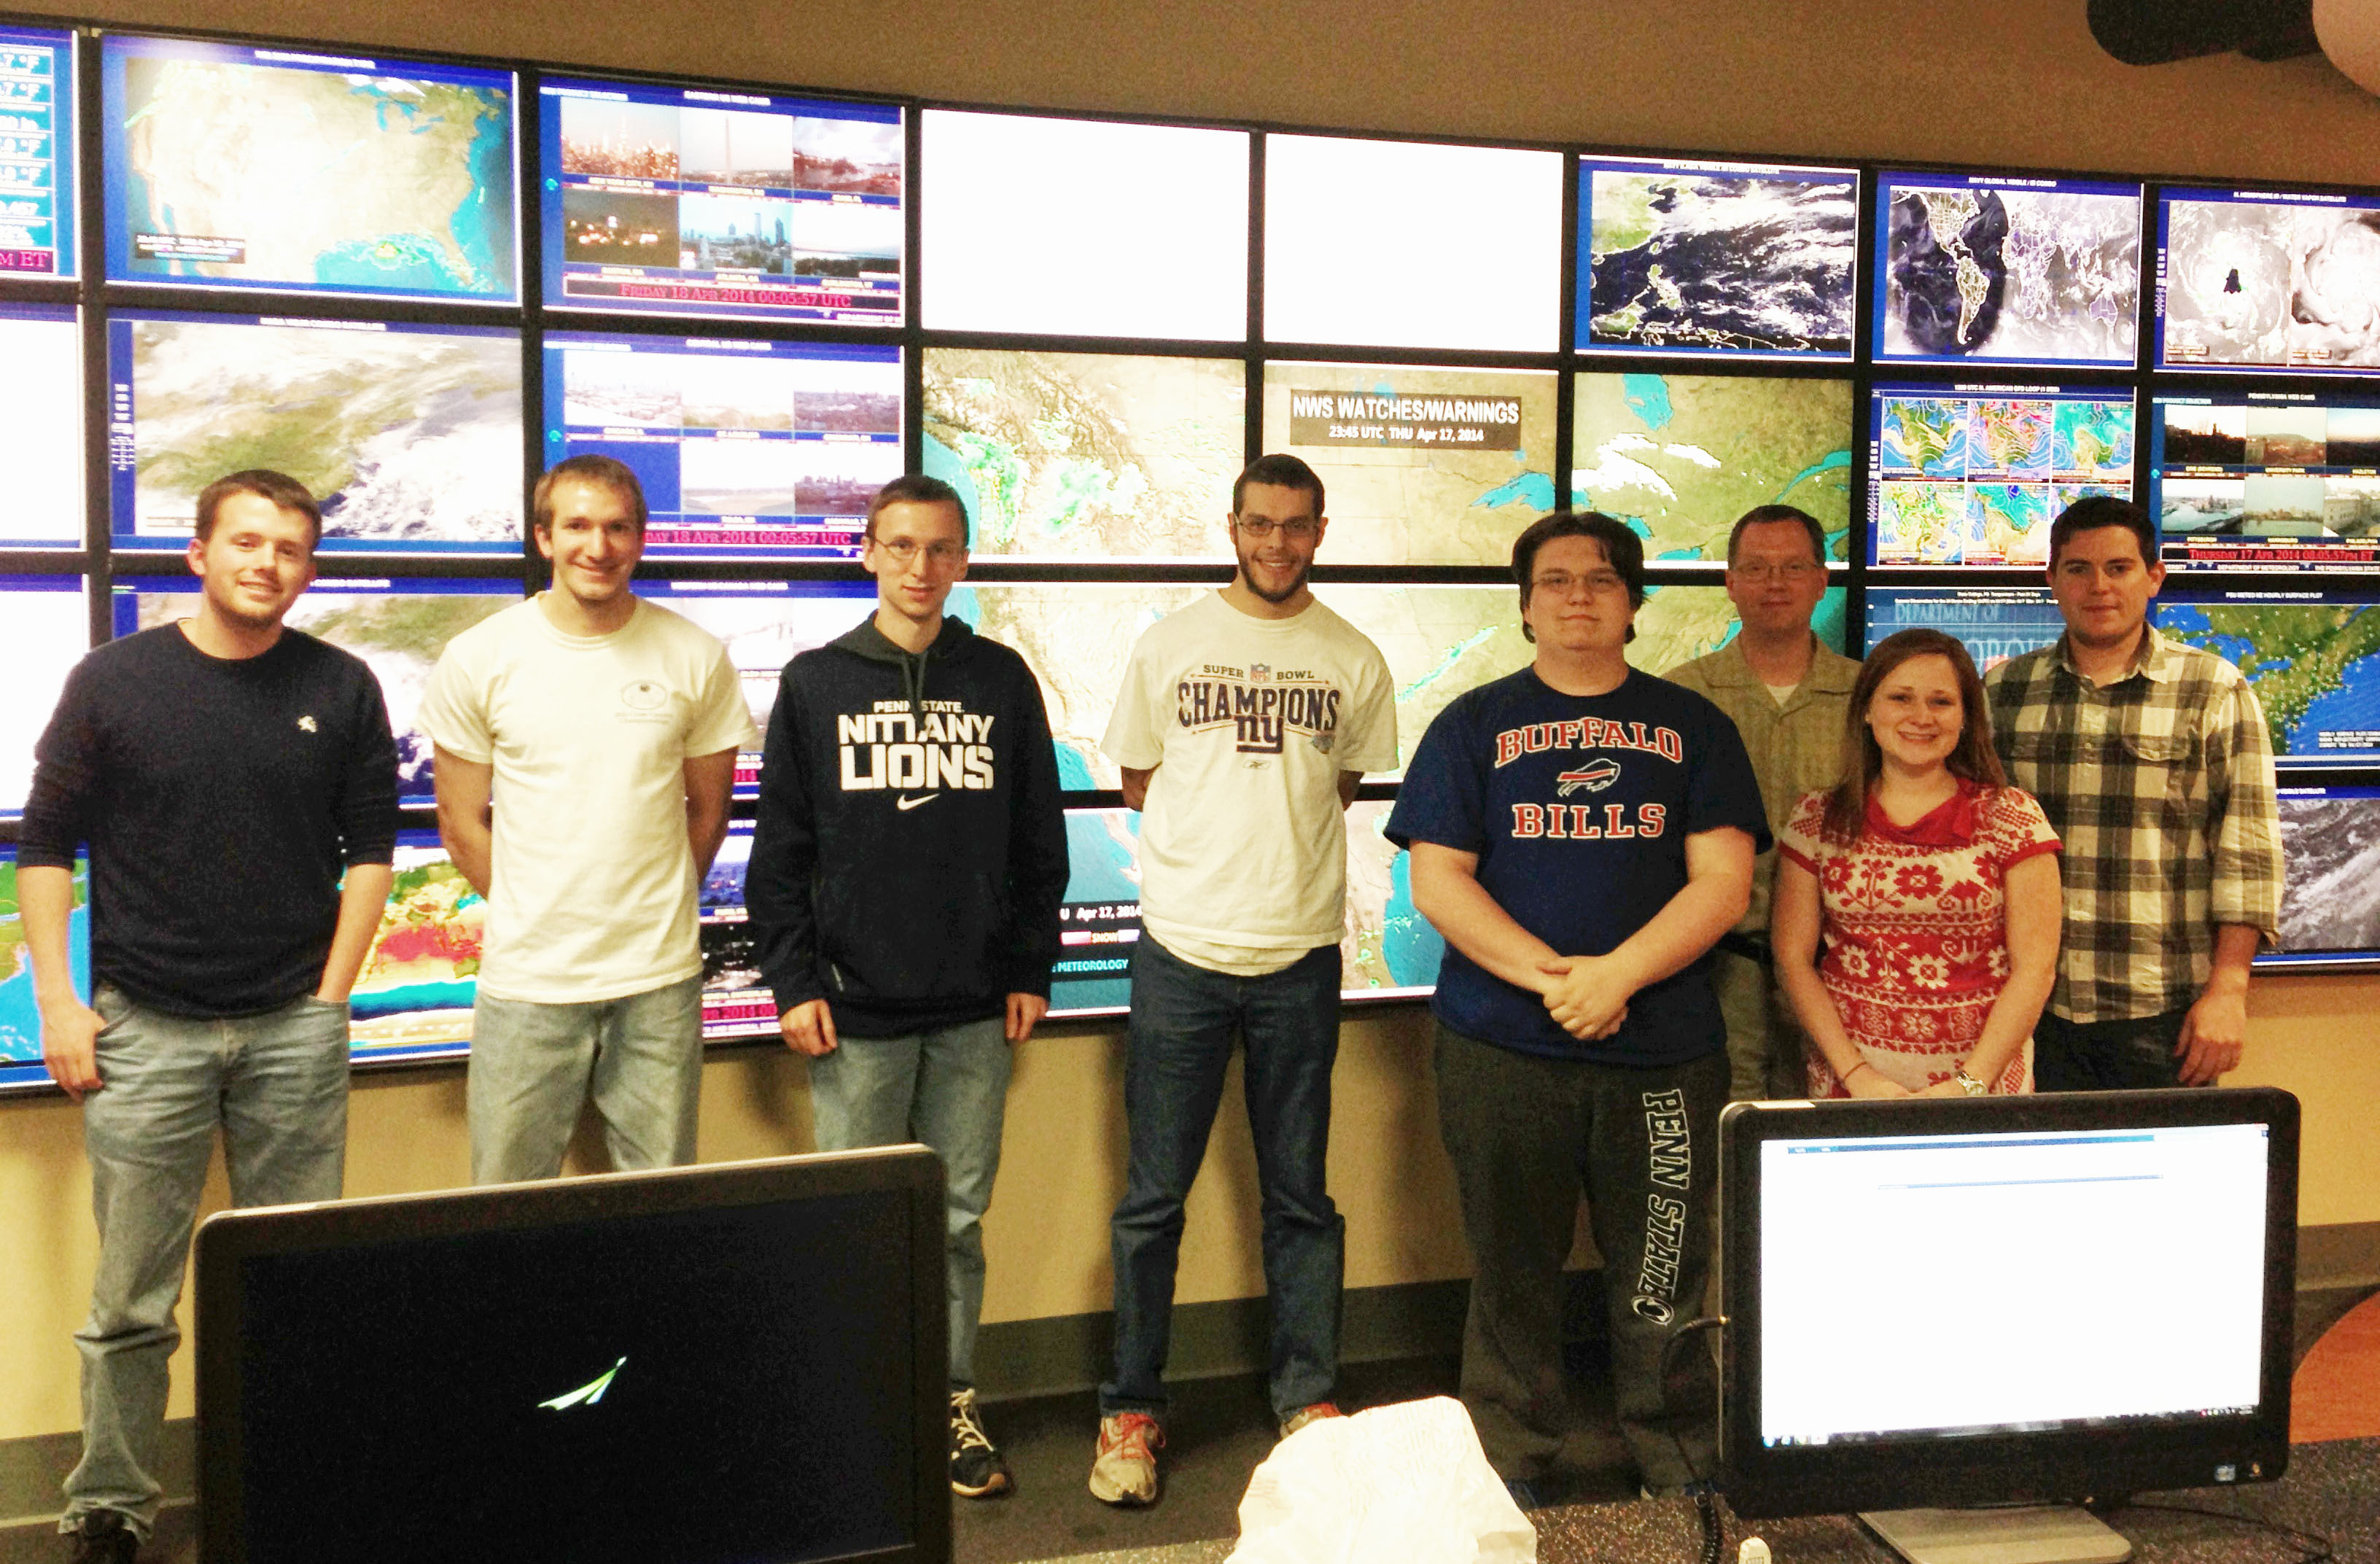 Members of Penn State's 2013-14 Weather Challenge championship team.